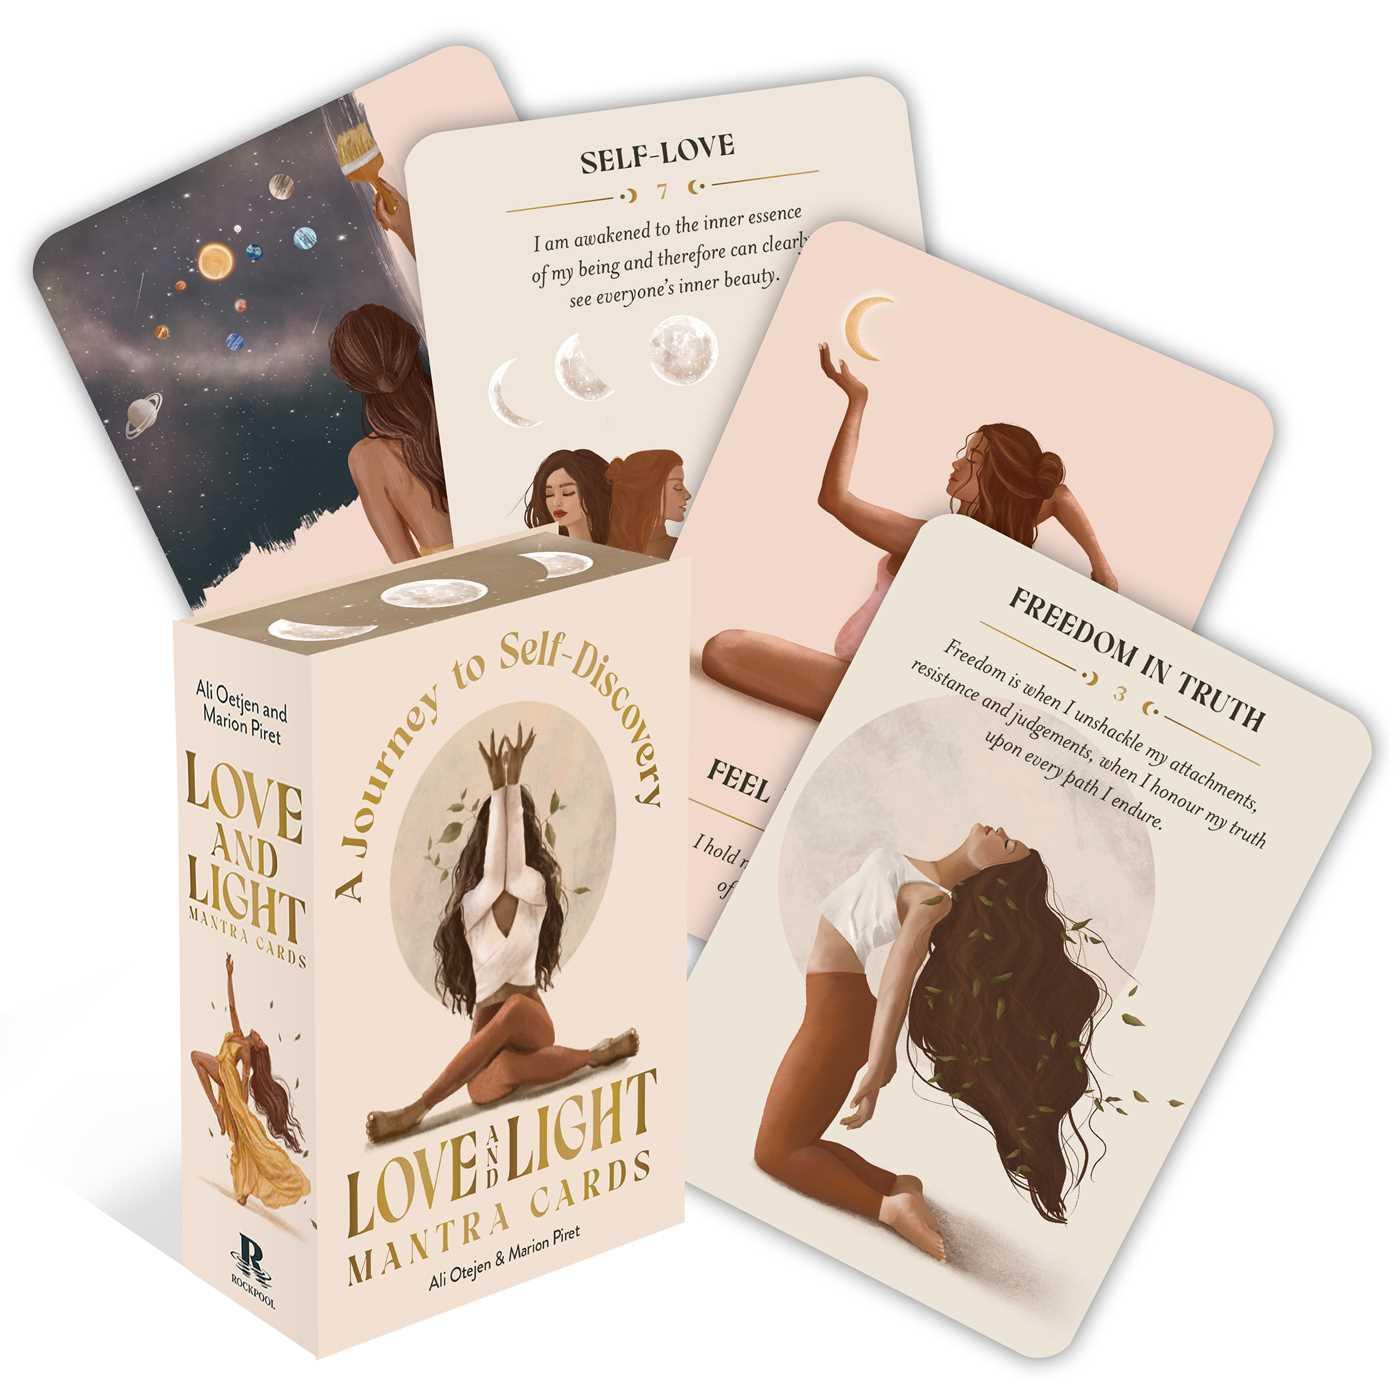 Game/Toy Love and Light Mantra Cards Marion Piret